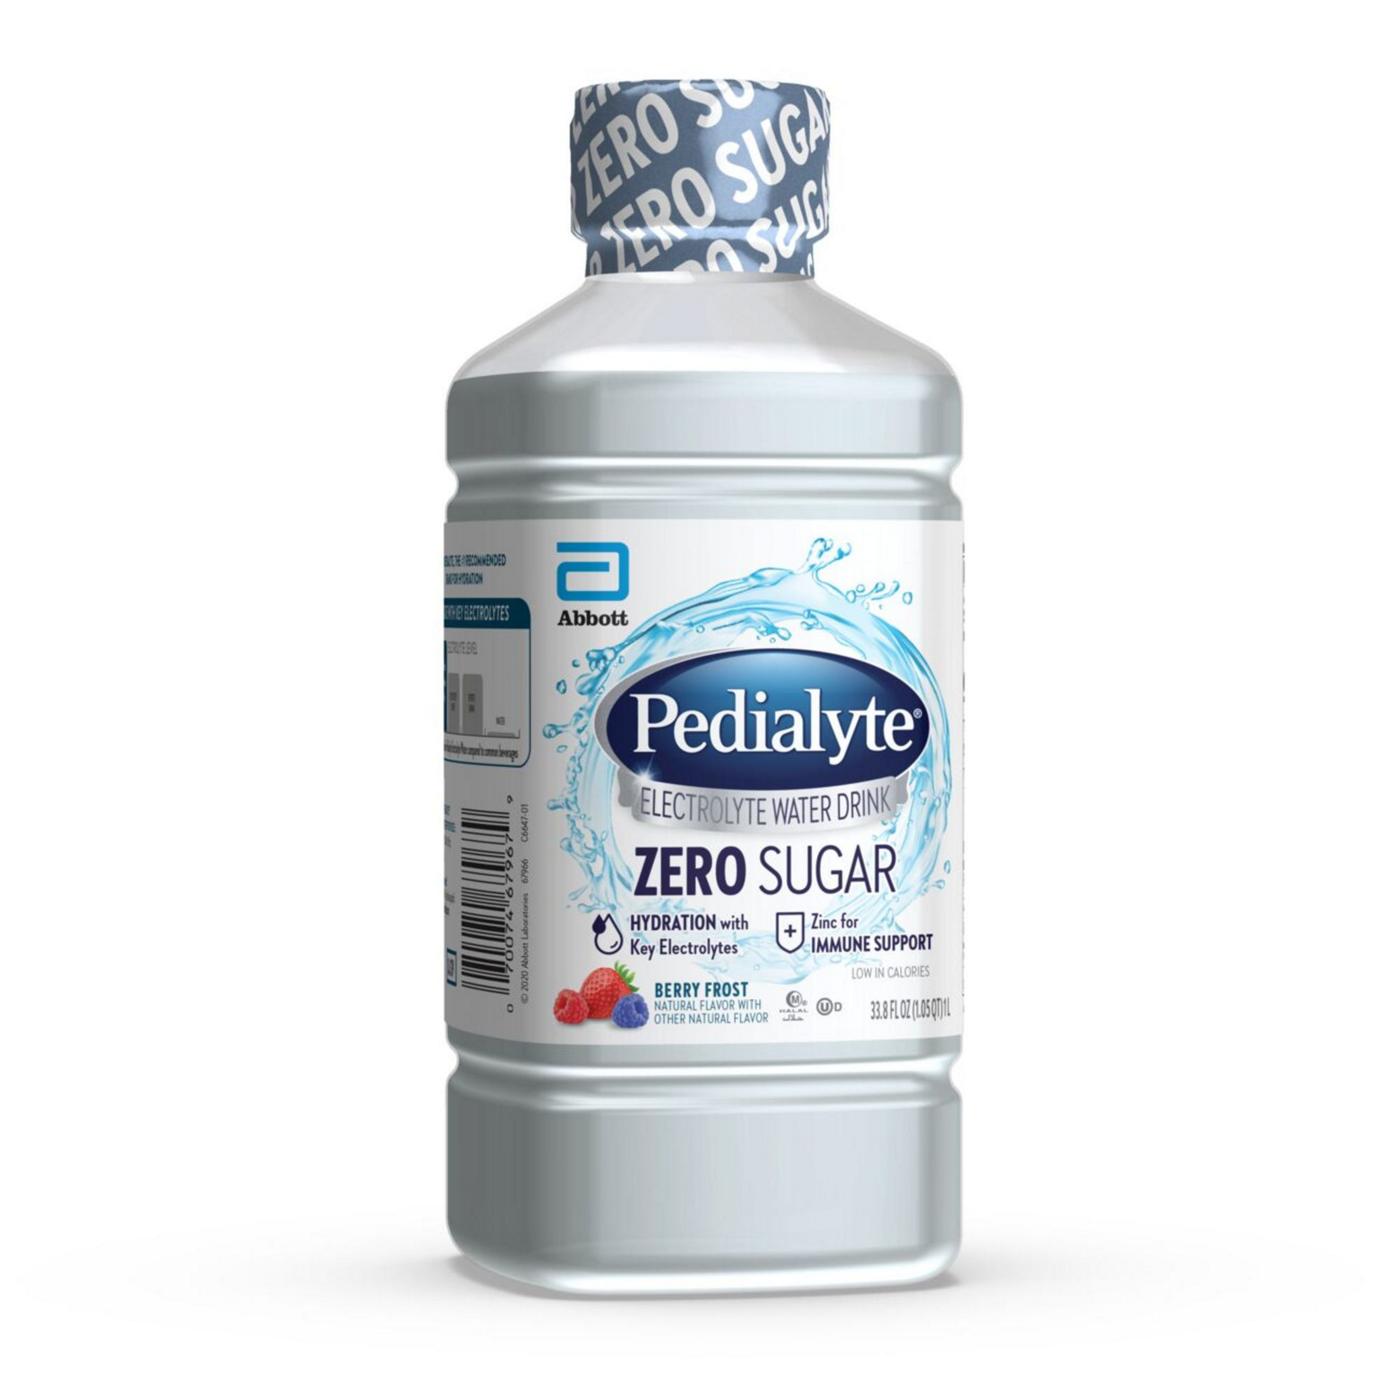 Pedialyte Zero Sugar Electrolyte Water Drink - Berry Frost; image 2 of 9